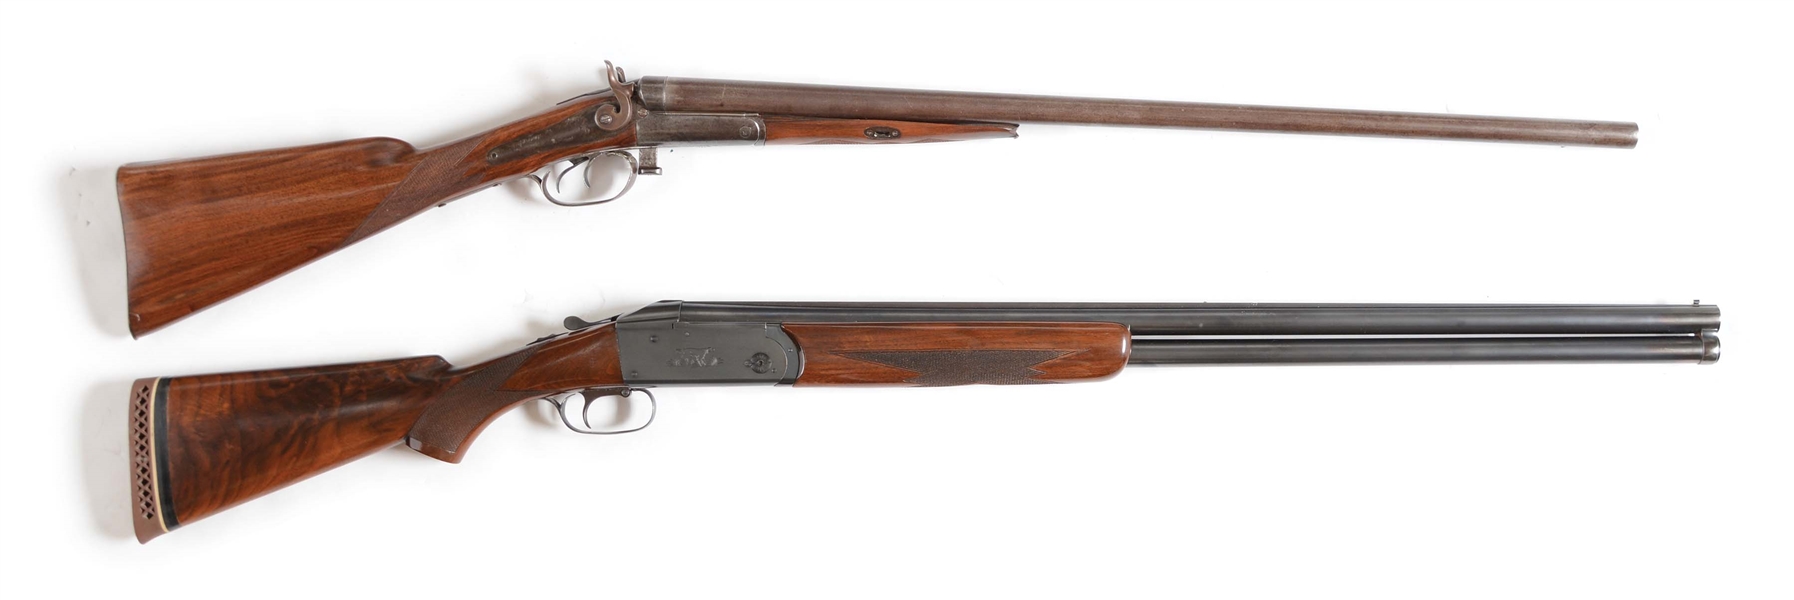 (C) LOT OF TWO: TWO QUALITY ANTIQUE AND PRE-WAR SHOTGUNS, ONE PARKER AND ONE REMINGTON.